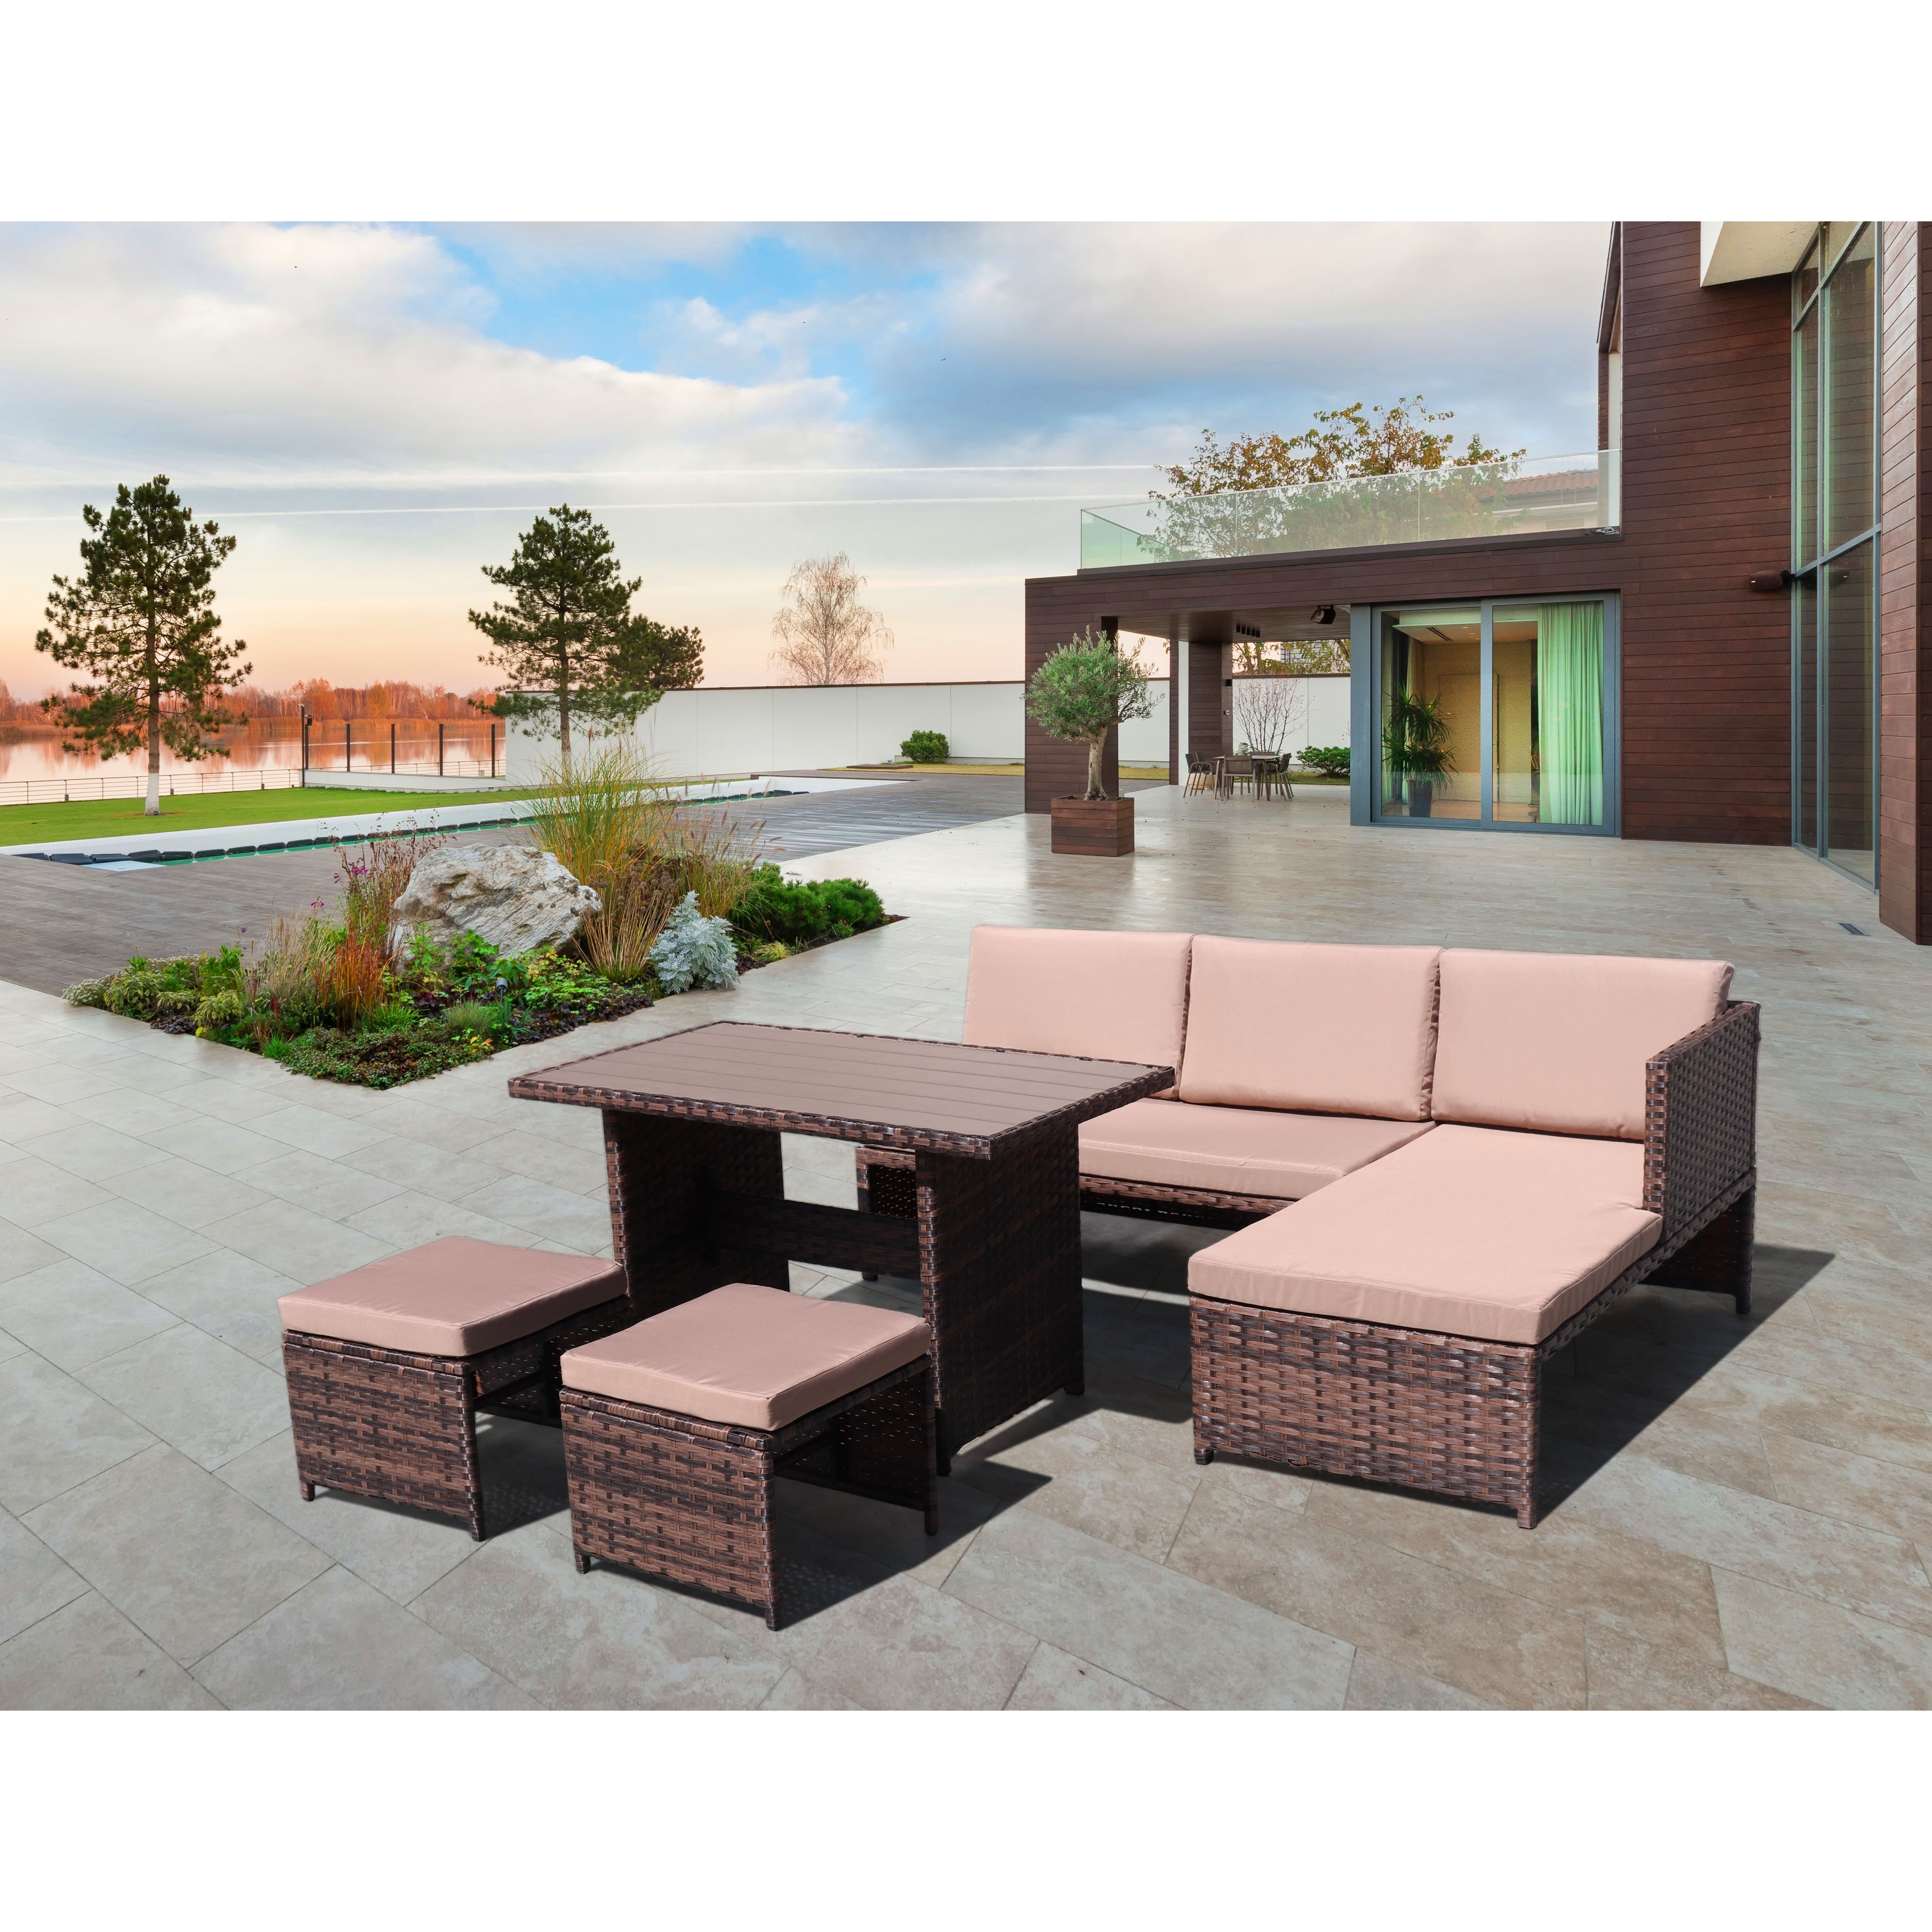 5-piece Rattan Wicker Sectional Patio Set For 4-5  Perfect For Balcony  Terrace and Garden Relaxation.